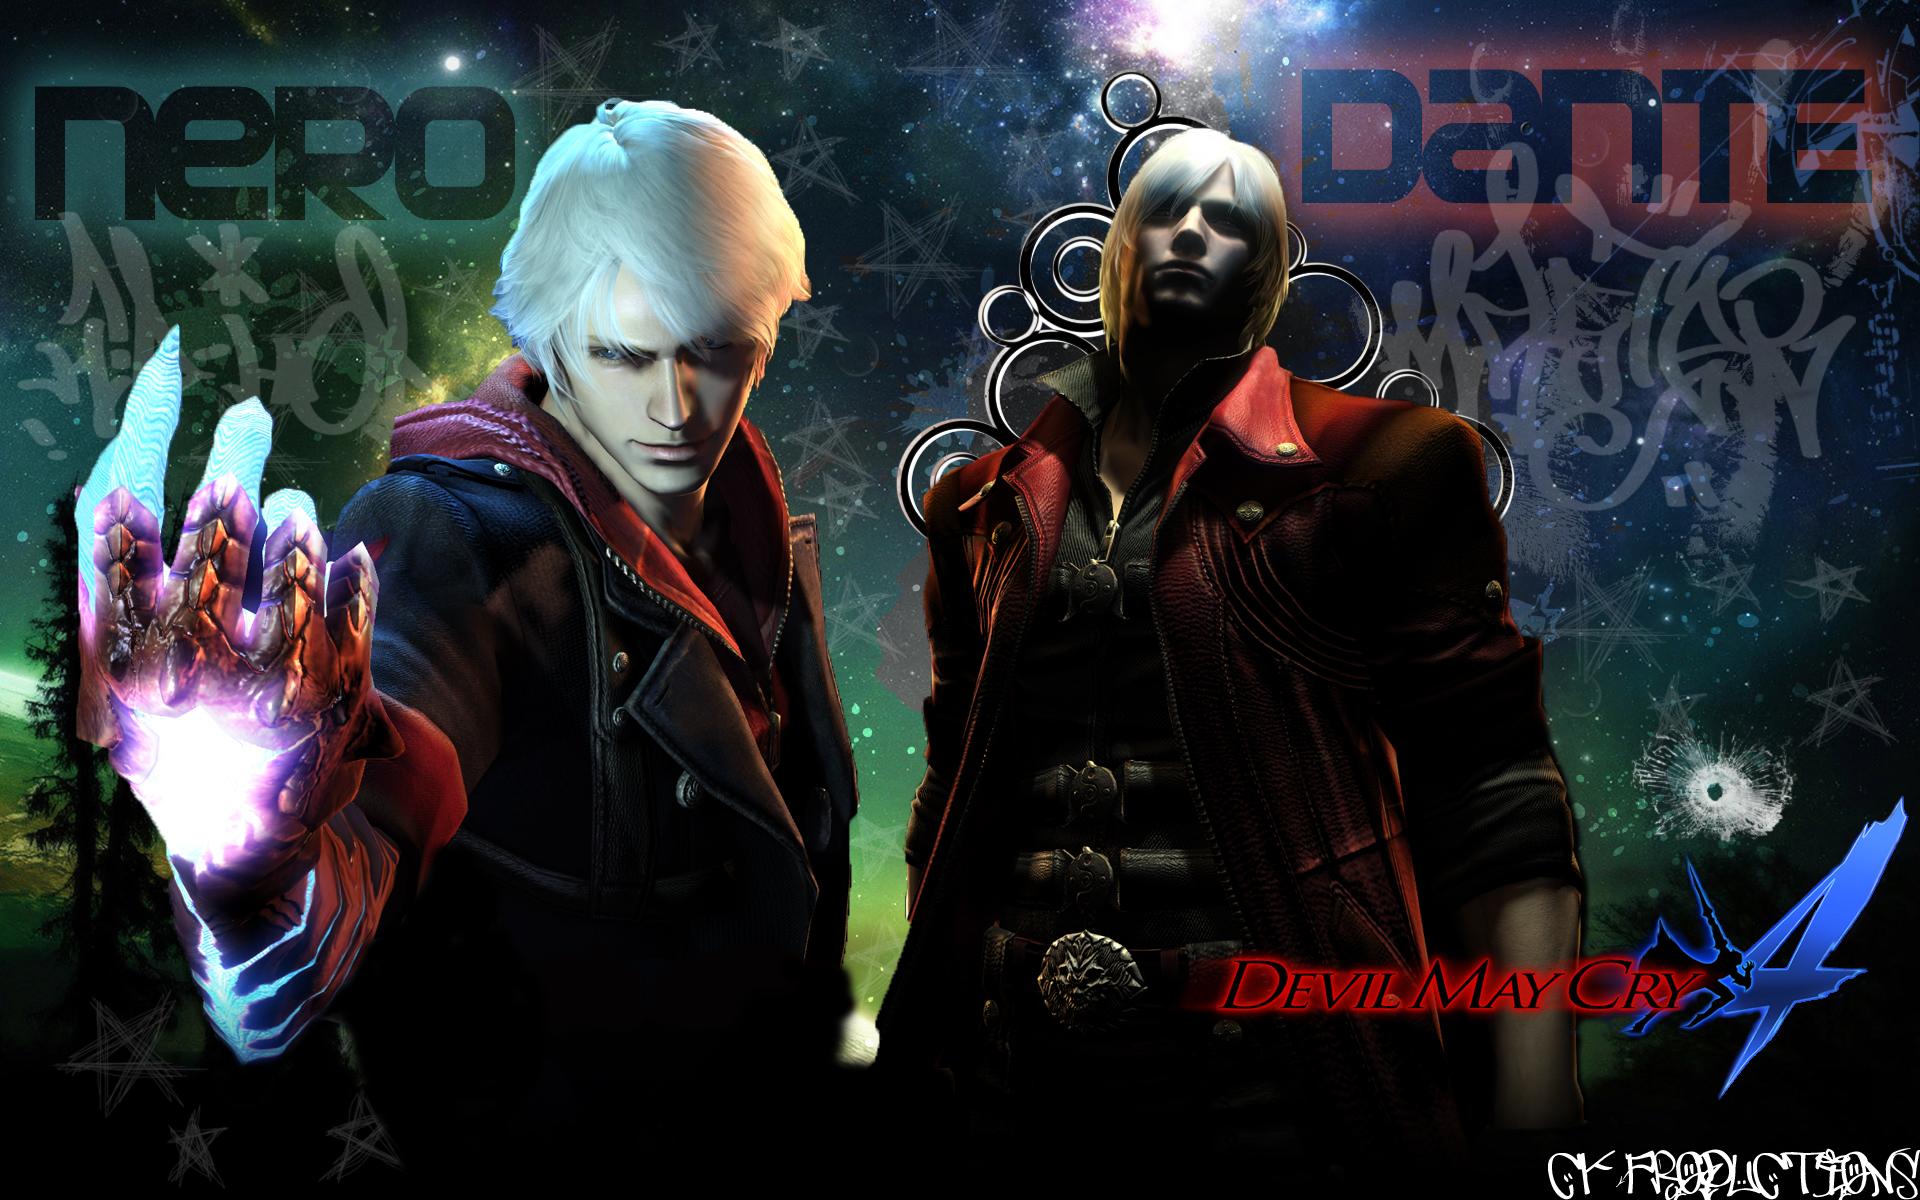 Devil May Cry Wallpaper デビルメイクライの壁紙 1 2 Devil May Cry Wallpaper デビルメイクライの壁紙 Naver まとめ